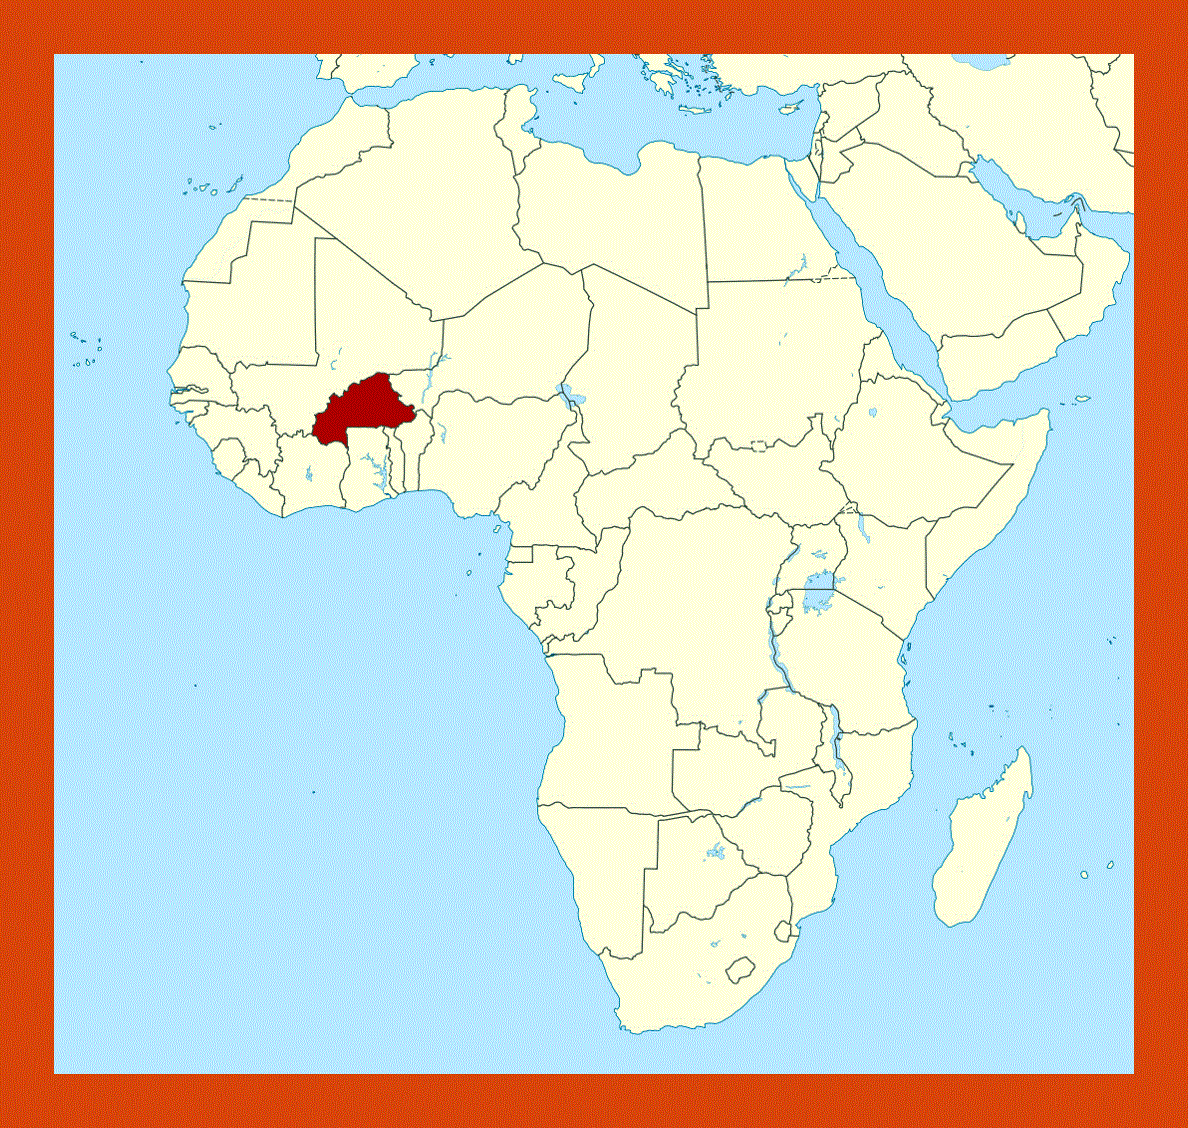 Location map of Burkina Faso in Africa